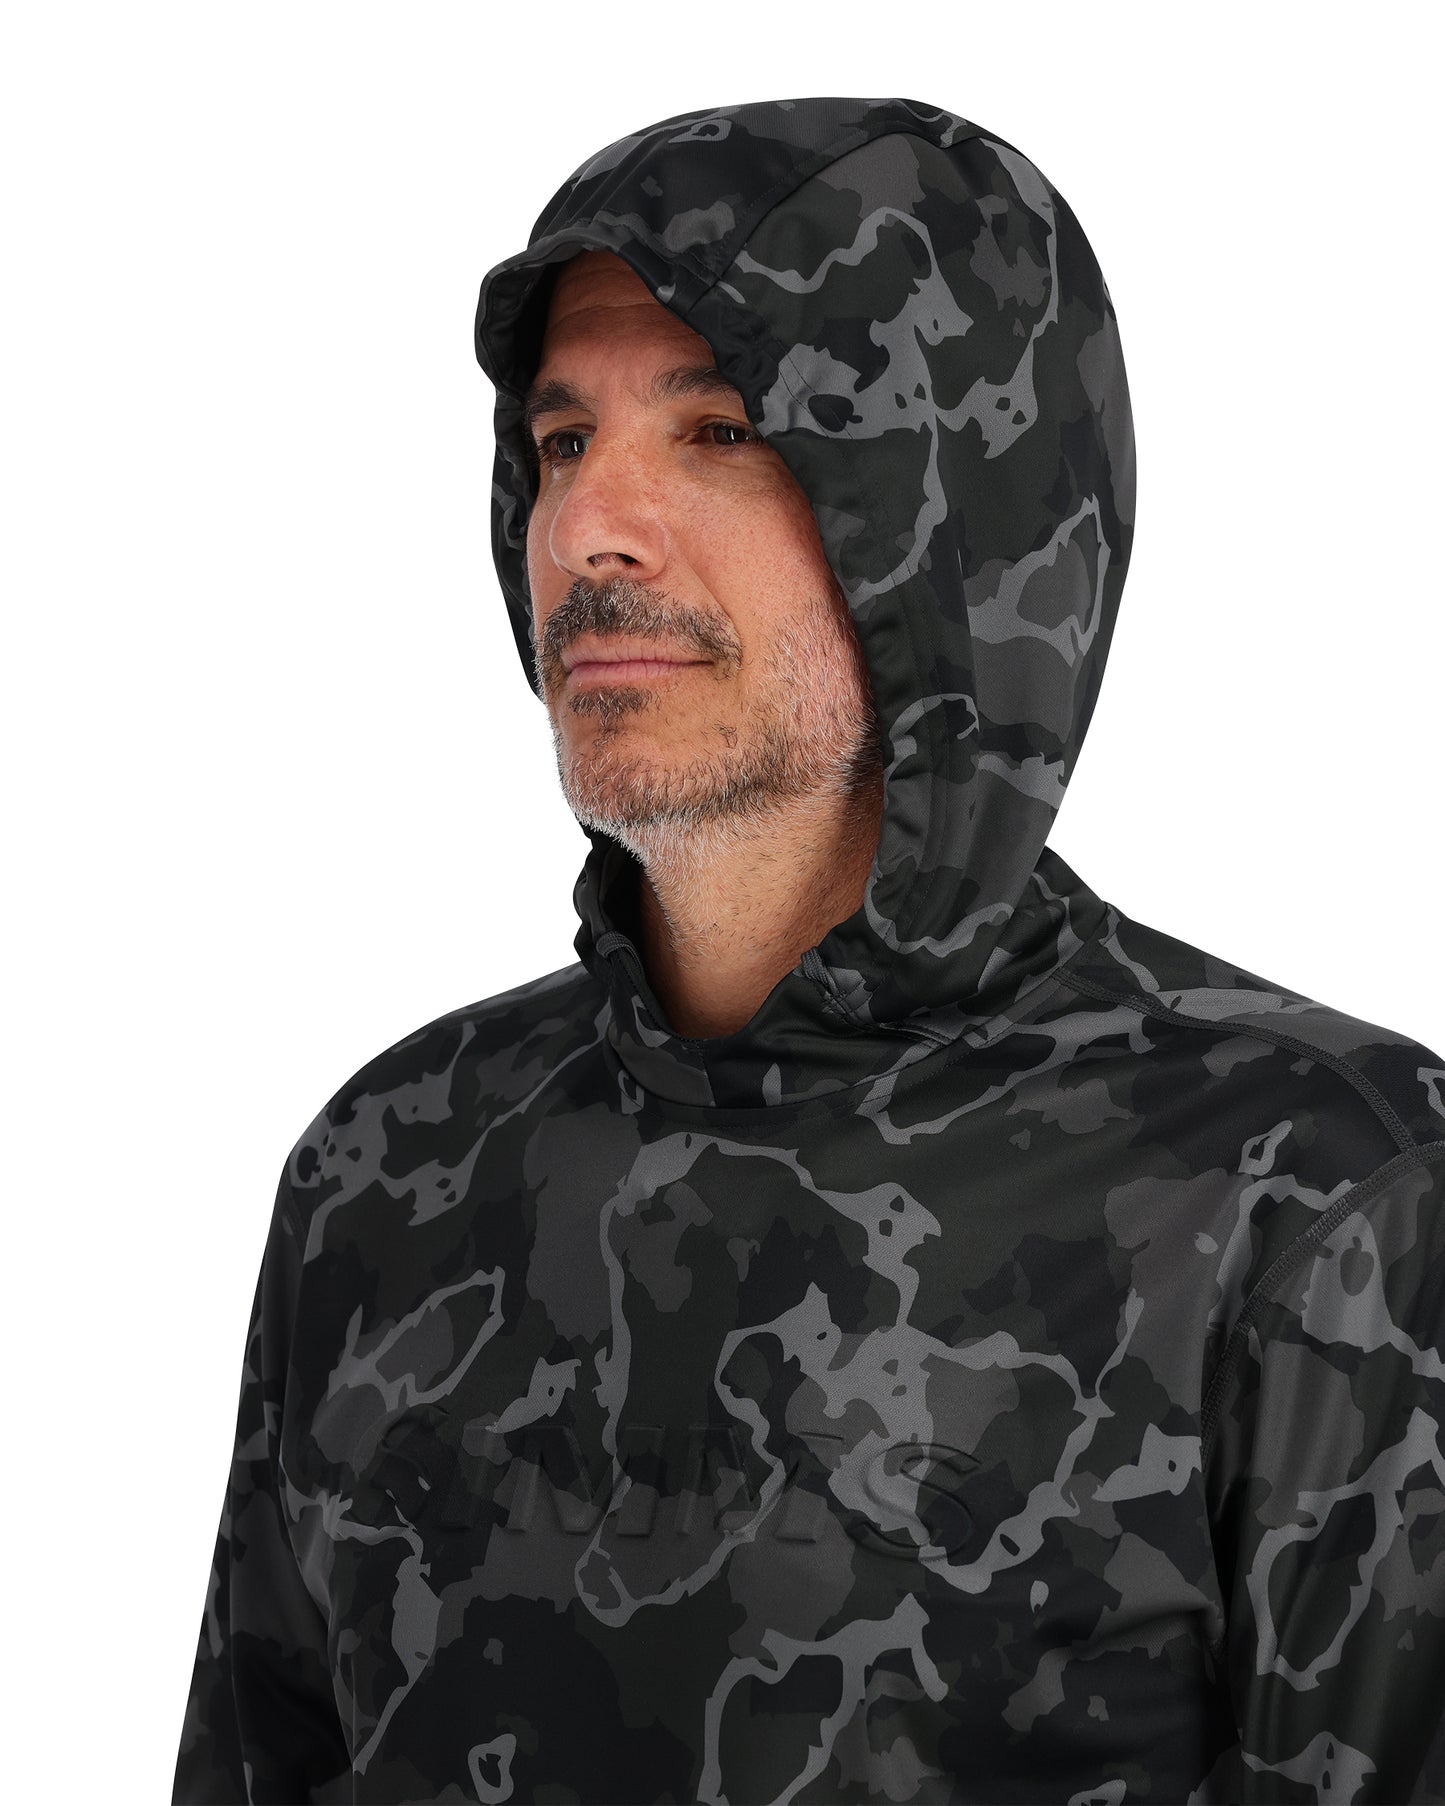 13846-1033-simms-challenger-hoody-model-f23-front